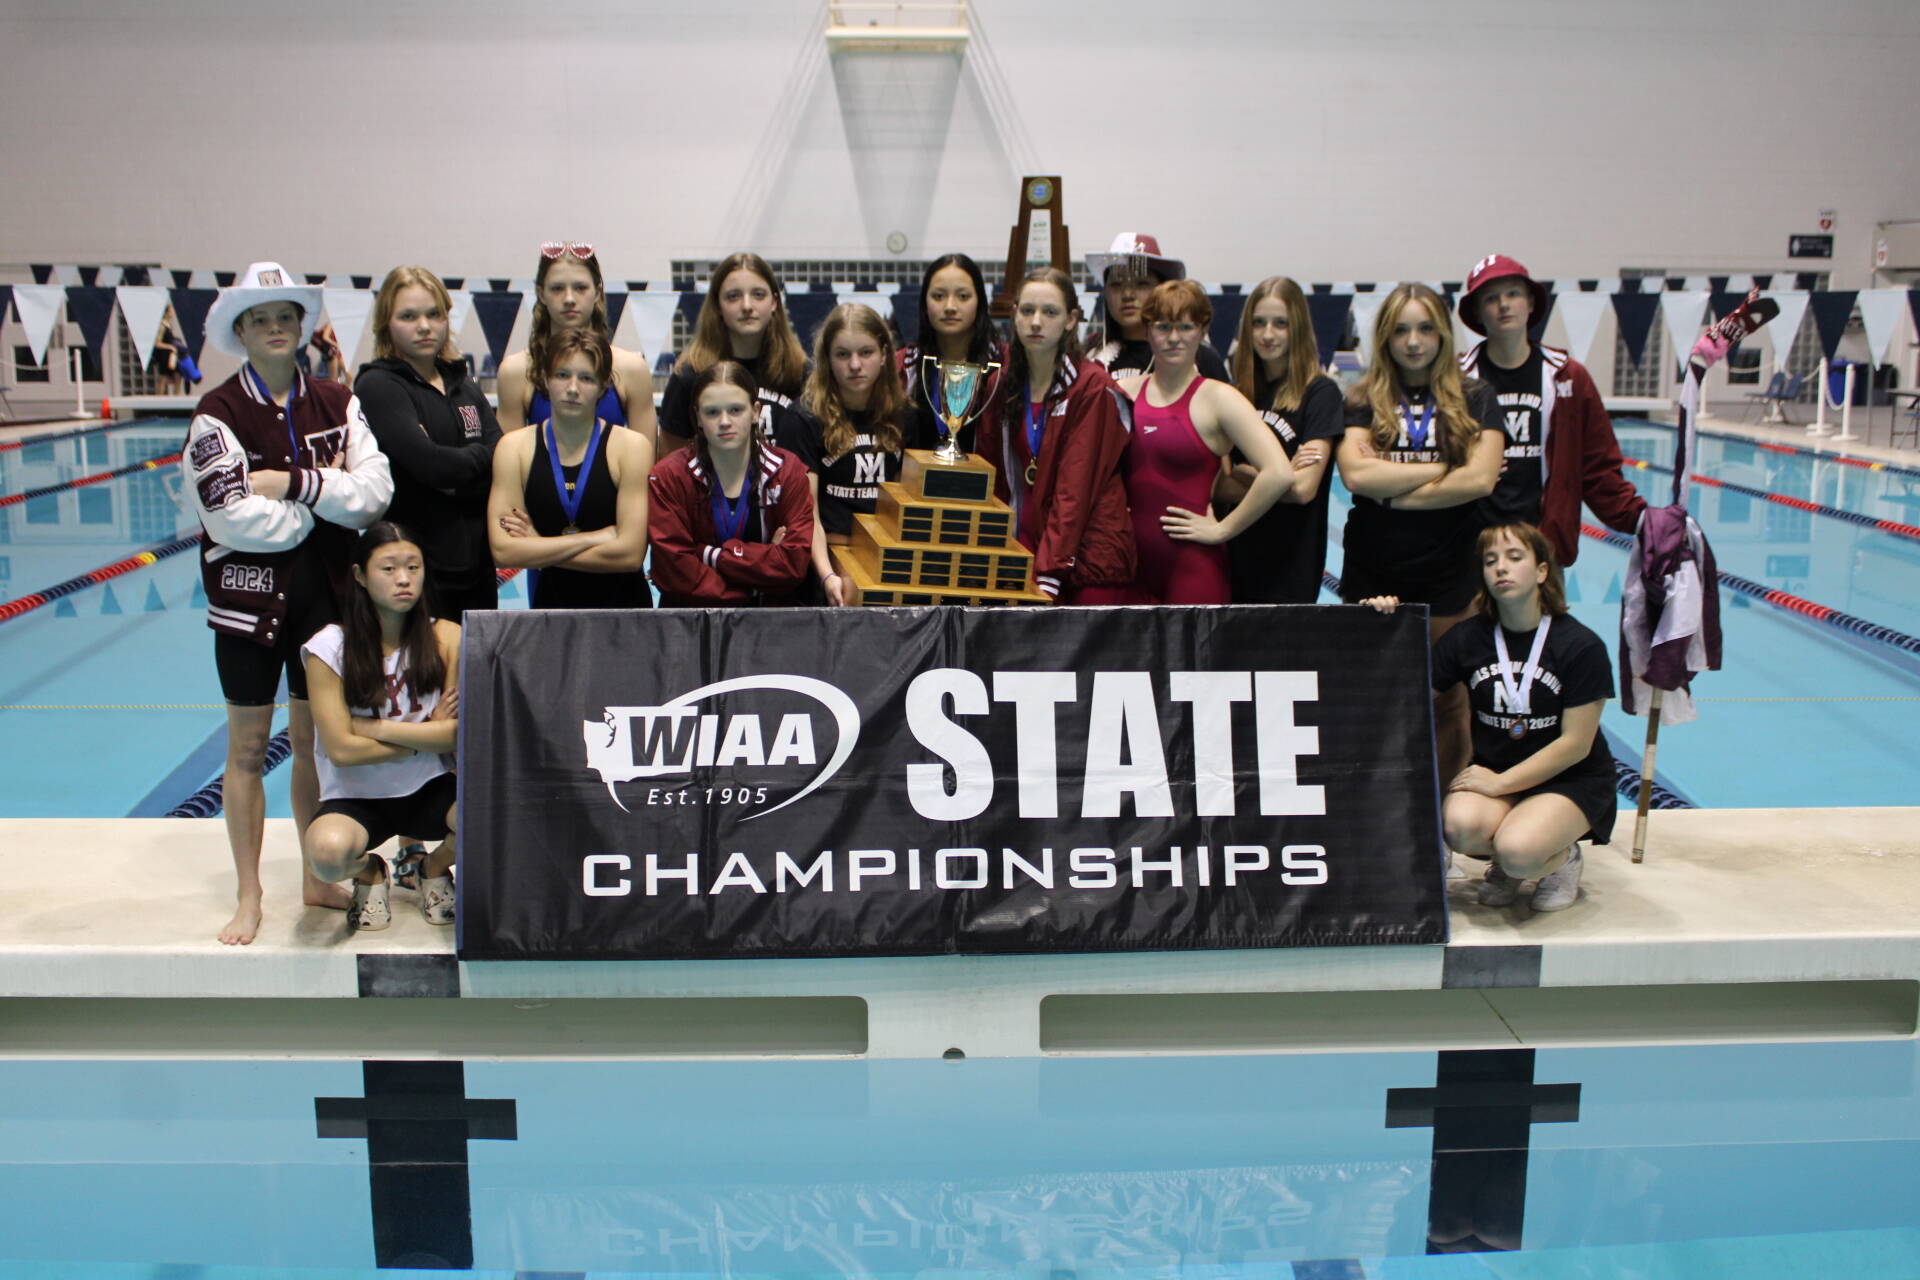 Mercer Island High School’s girls swim and dive squad was named the Washington Interscholastic Activities Association (WIAA) 3A team of the month. The WIAA website notes that the Islanders “dominated the 3A state swim and dive meet with the highest point total in state history with 385 points, en route to their team championship. The team won nine out of the 12 possible events at the state meet and set two state records along the way. This team is projected to have eight All-Americans and broke 10 school records this season as well.” Courtesy photo